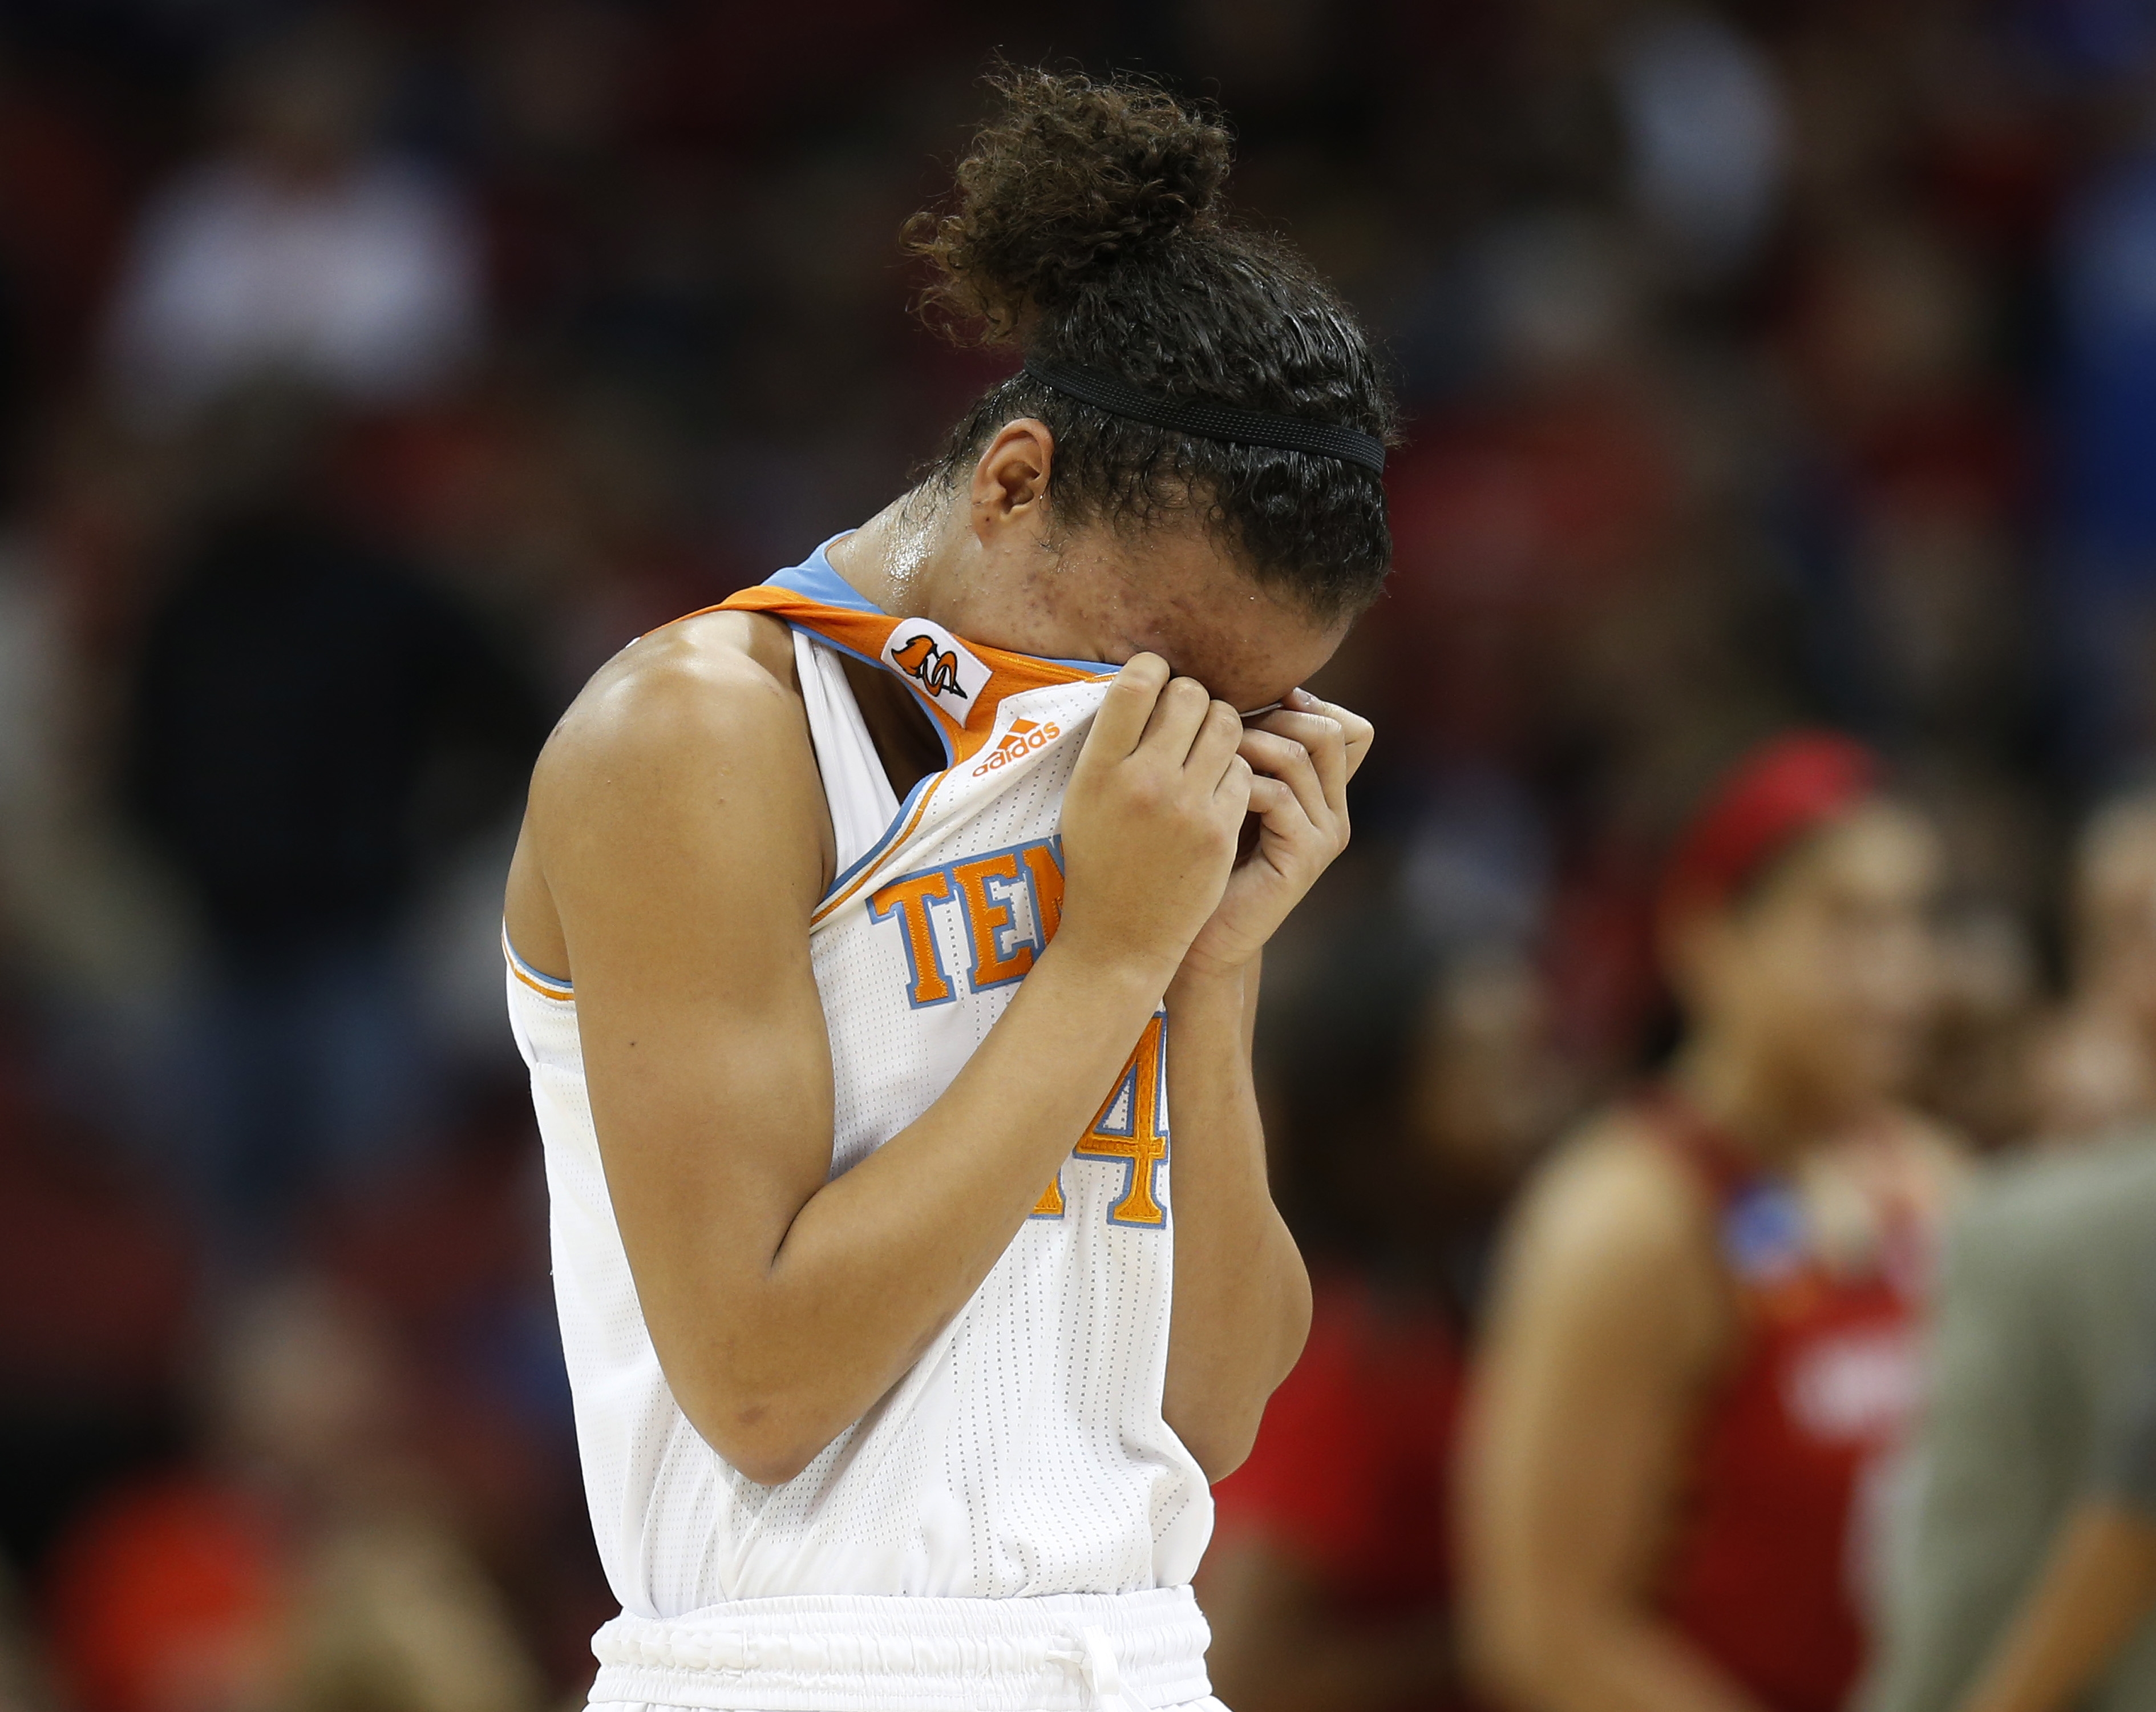 Tennessee Lady Vols basketball vs. Louisville in pictures